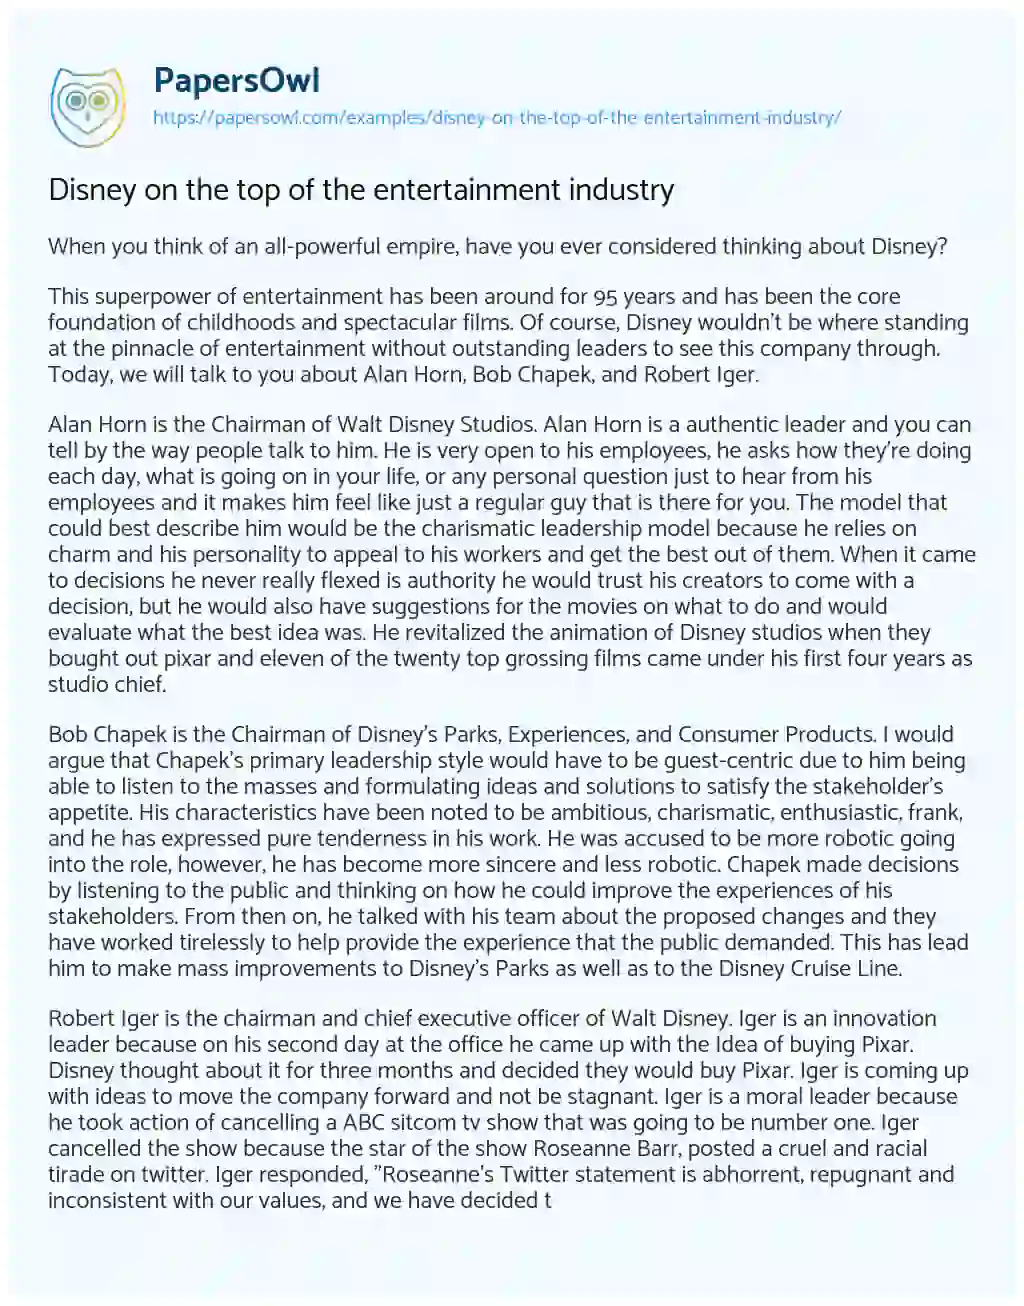 Essay on Disney on the Top of the Entertainment Industry